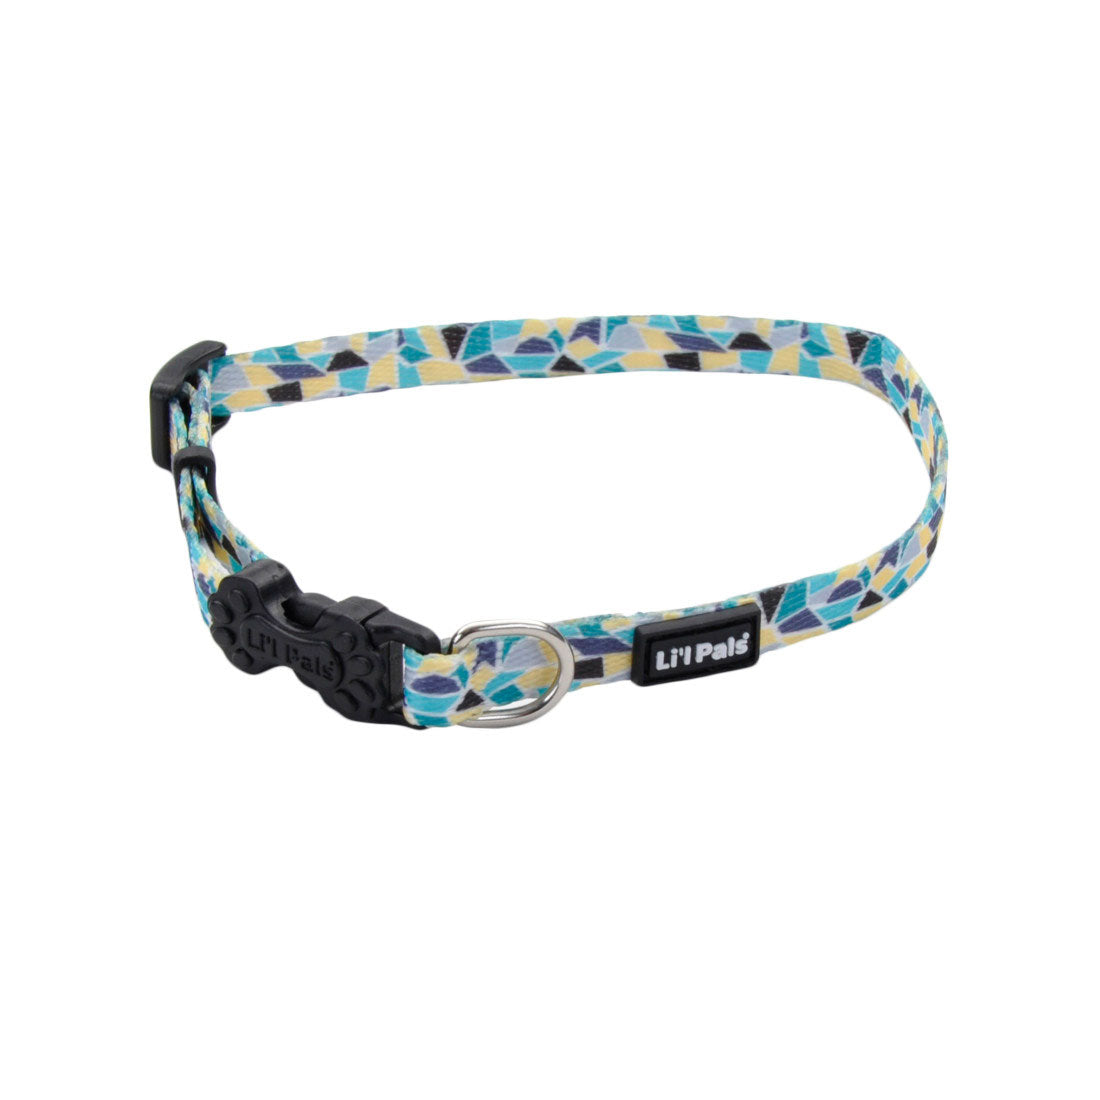 Li'l Pals Adjustable Collar Teal Yellow Grey Stained Glass - Collares para Perros